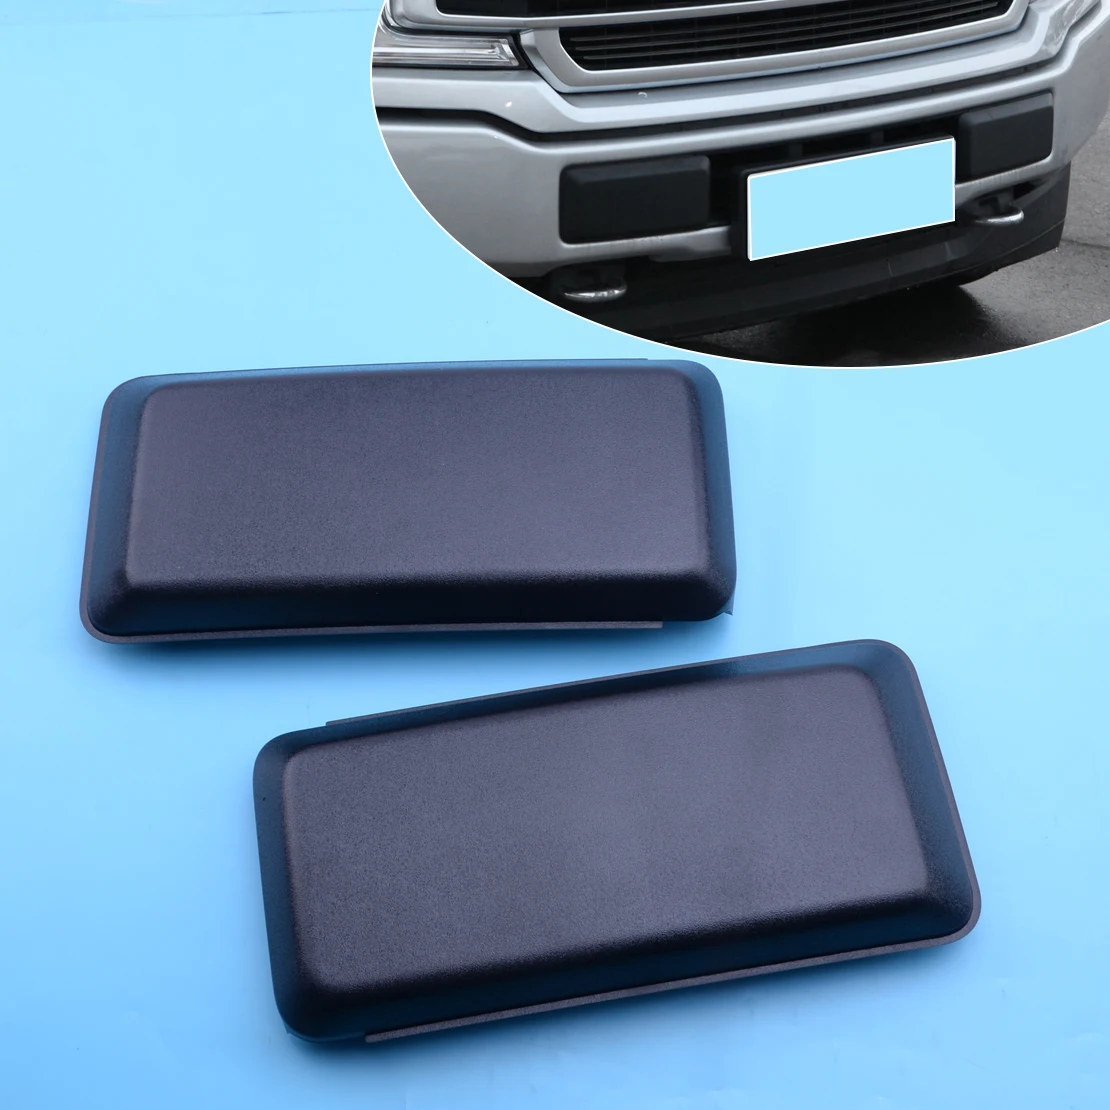 Decter Car Left Side Front Bumper Guards Inserts Cover Pads Caps Replacement for F150 2018 2019 2020 JL3Z 17E811 AB